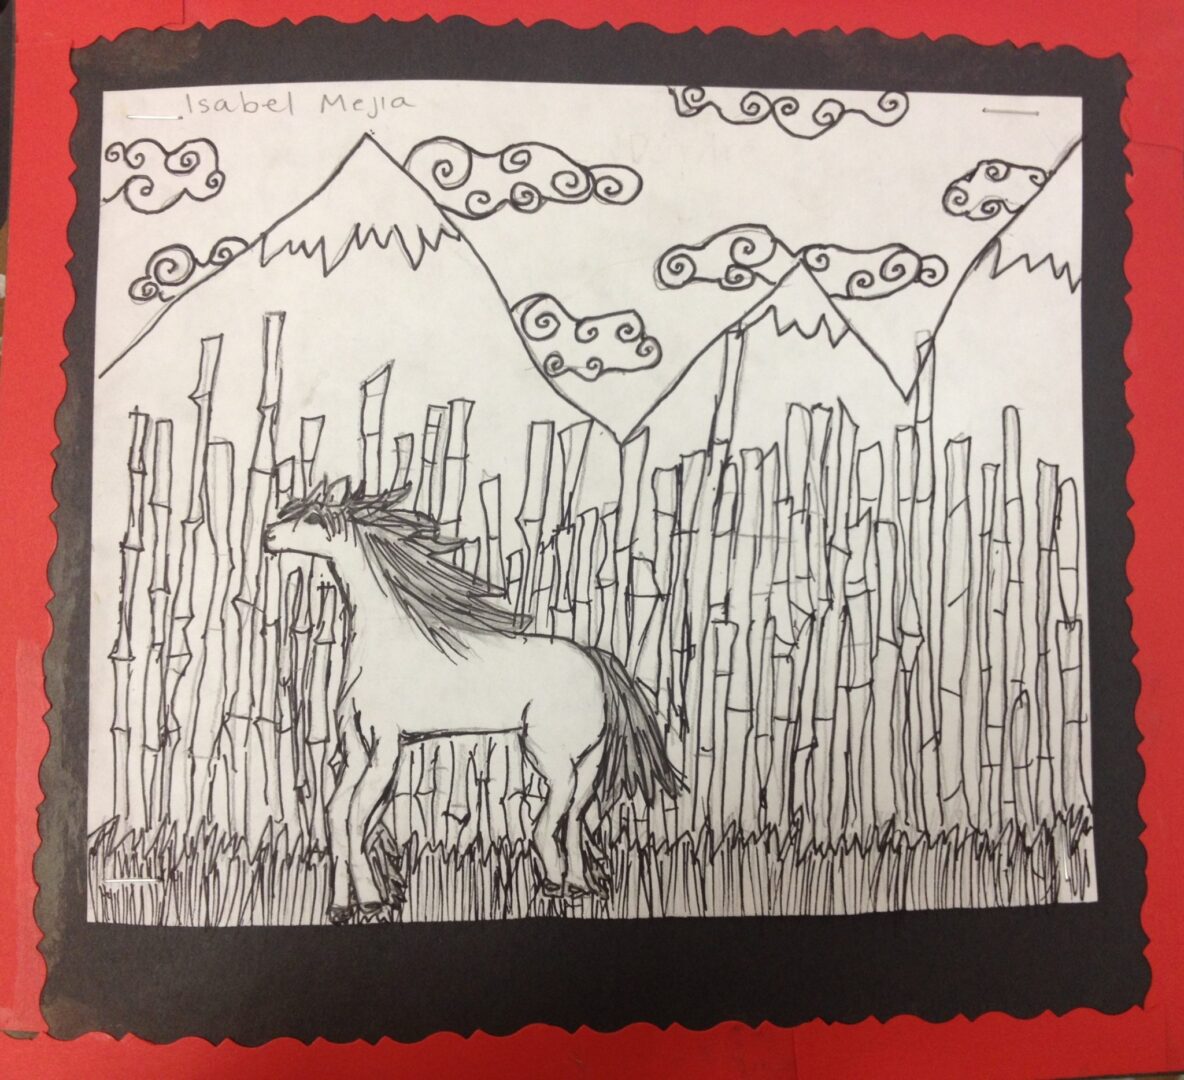 A drawing of a horse with mountains in the background.